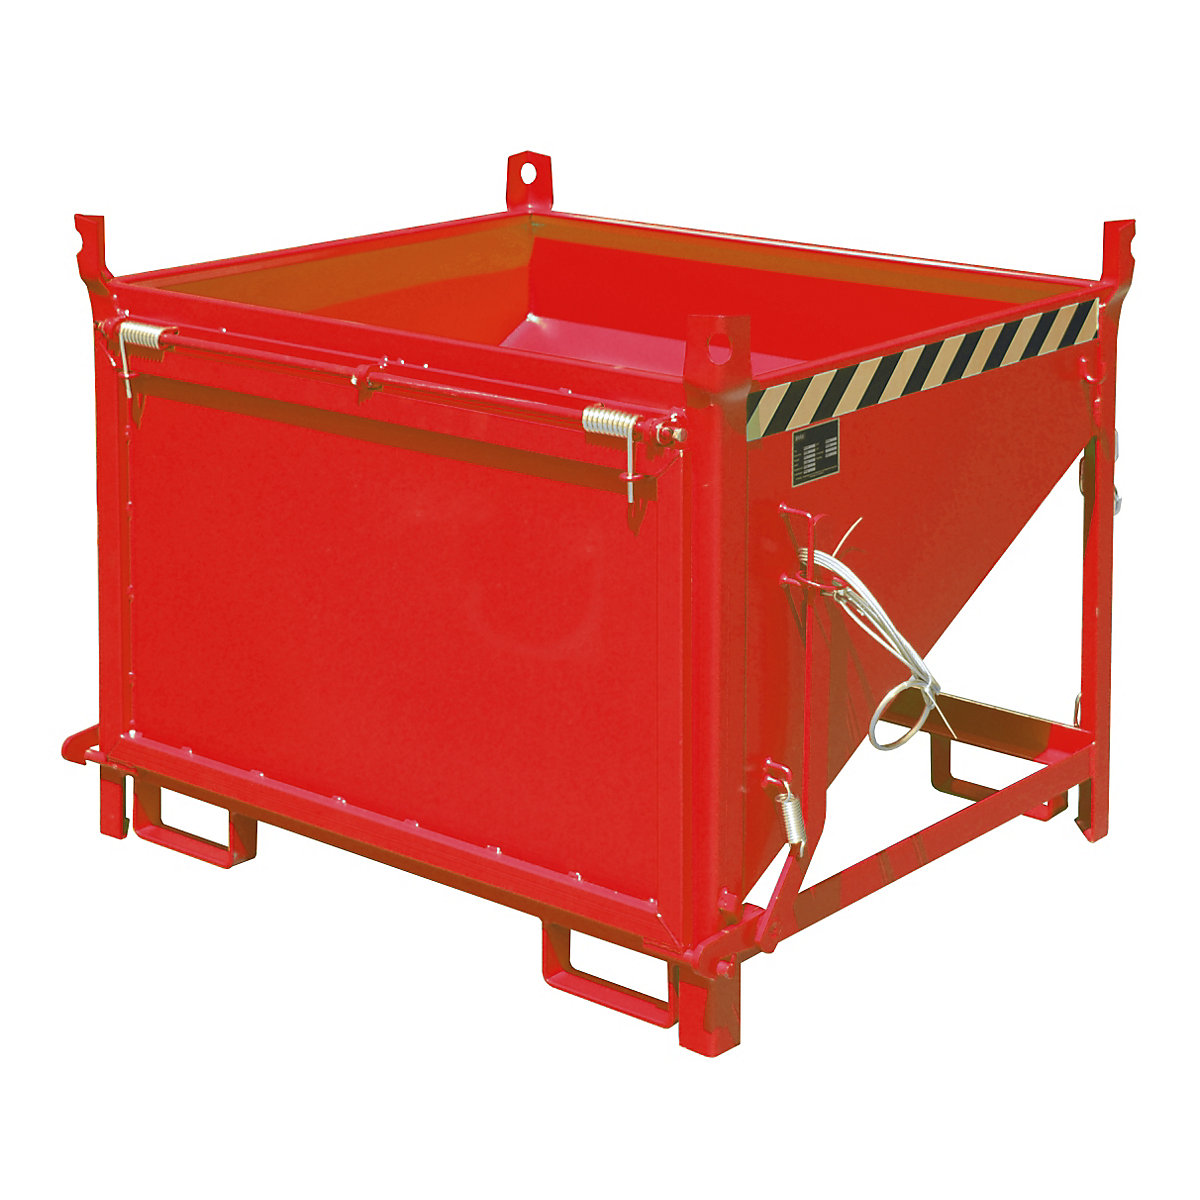 Silo container – eurokraft pro, capacity 0.50 m³, with front flap, flame red RAL 3000-6